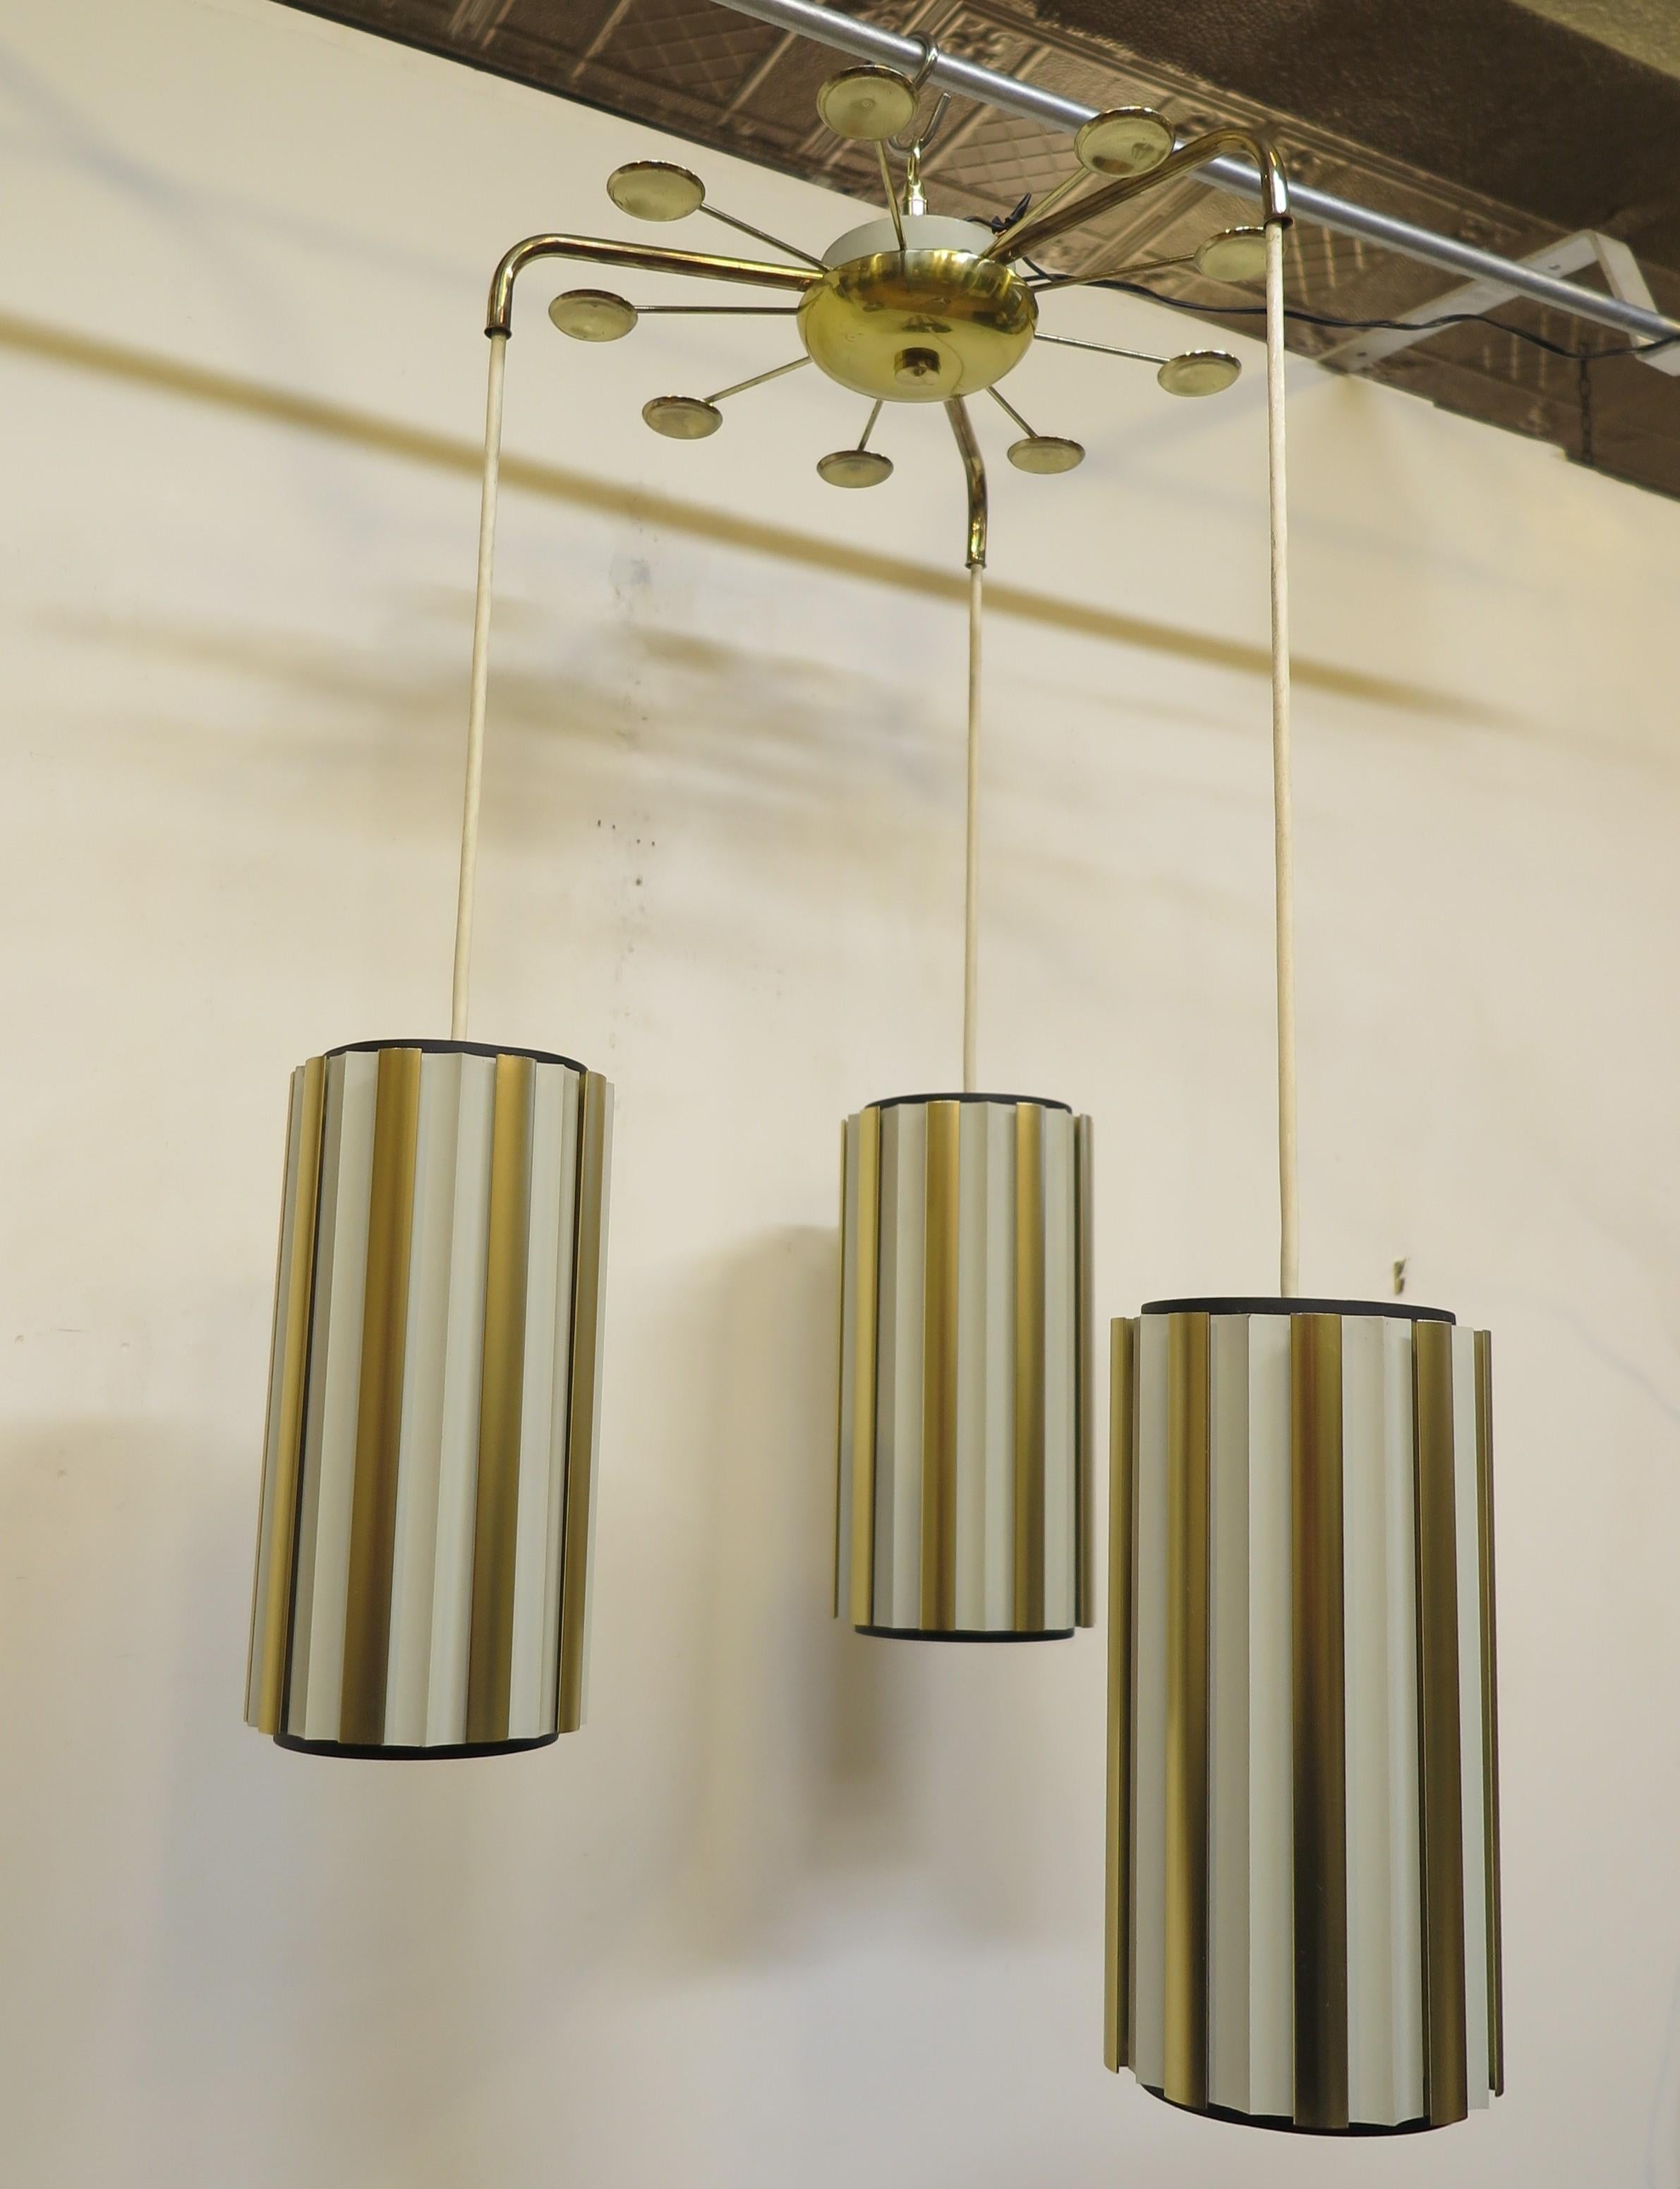 Mid-century cascading pendant chandelier by Lightolier attributed design  Gerald Thurston.  Three cascading hanging pendants of aluminum flange ribs vertically overlapping each other to form tall slotted cylinders. The cylinders are designed to